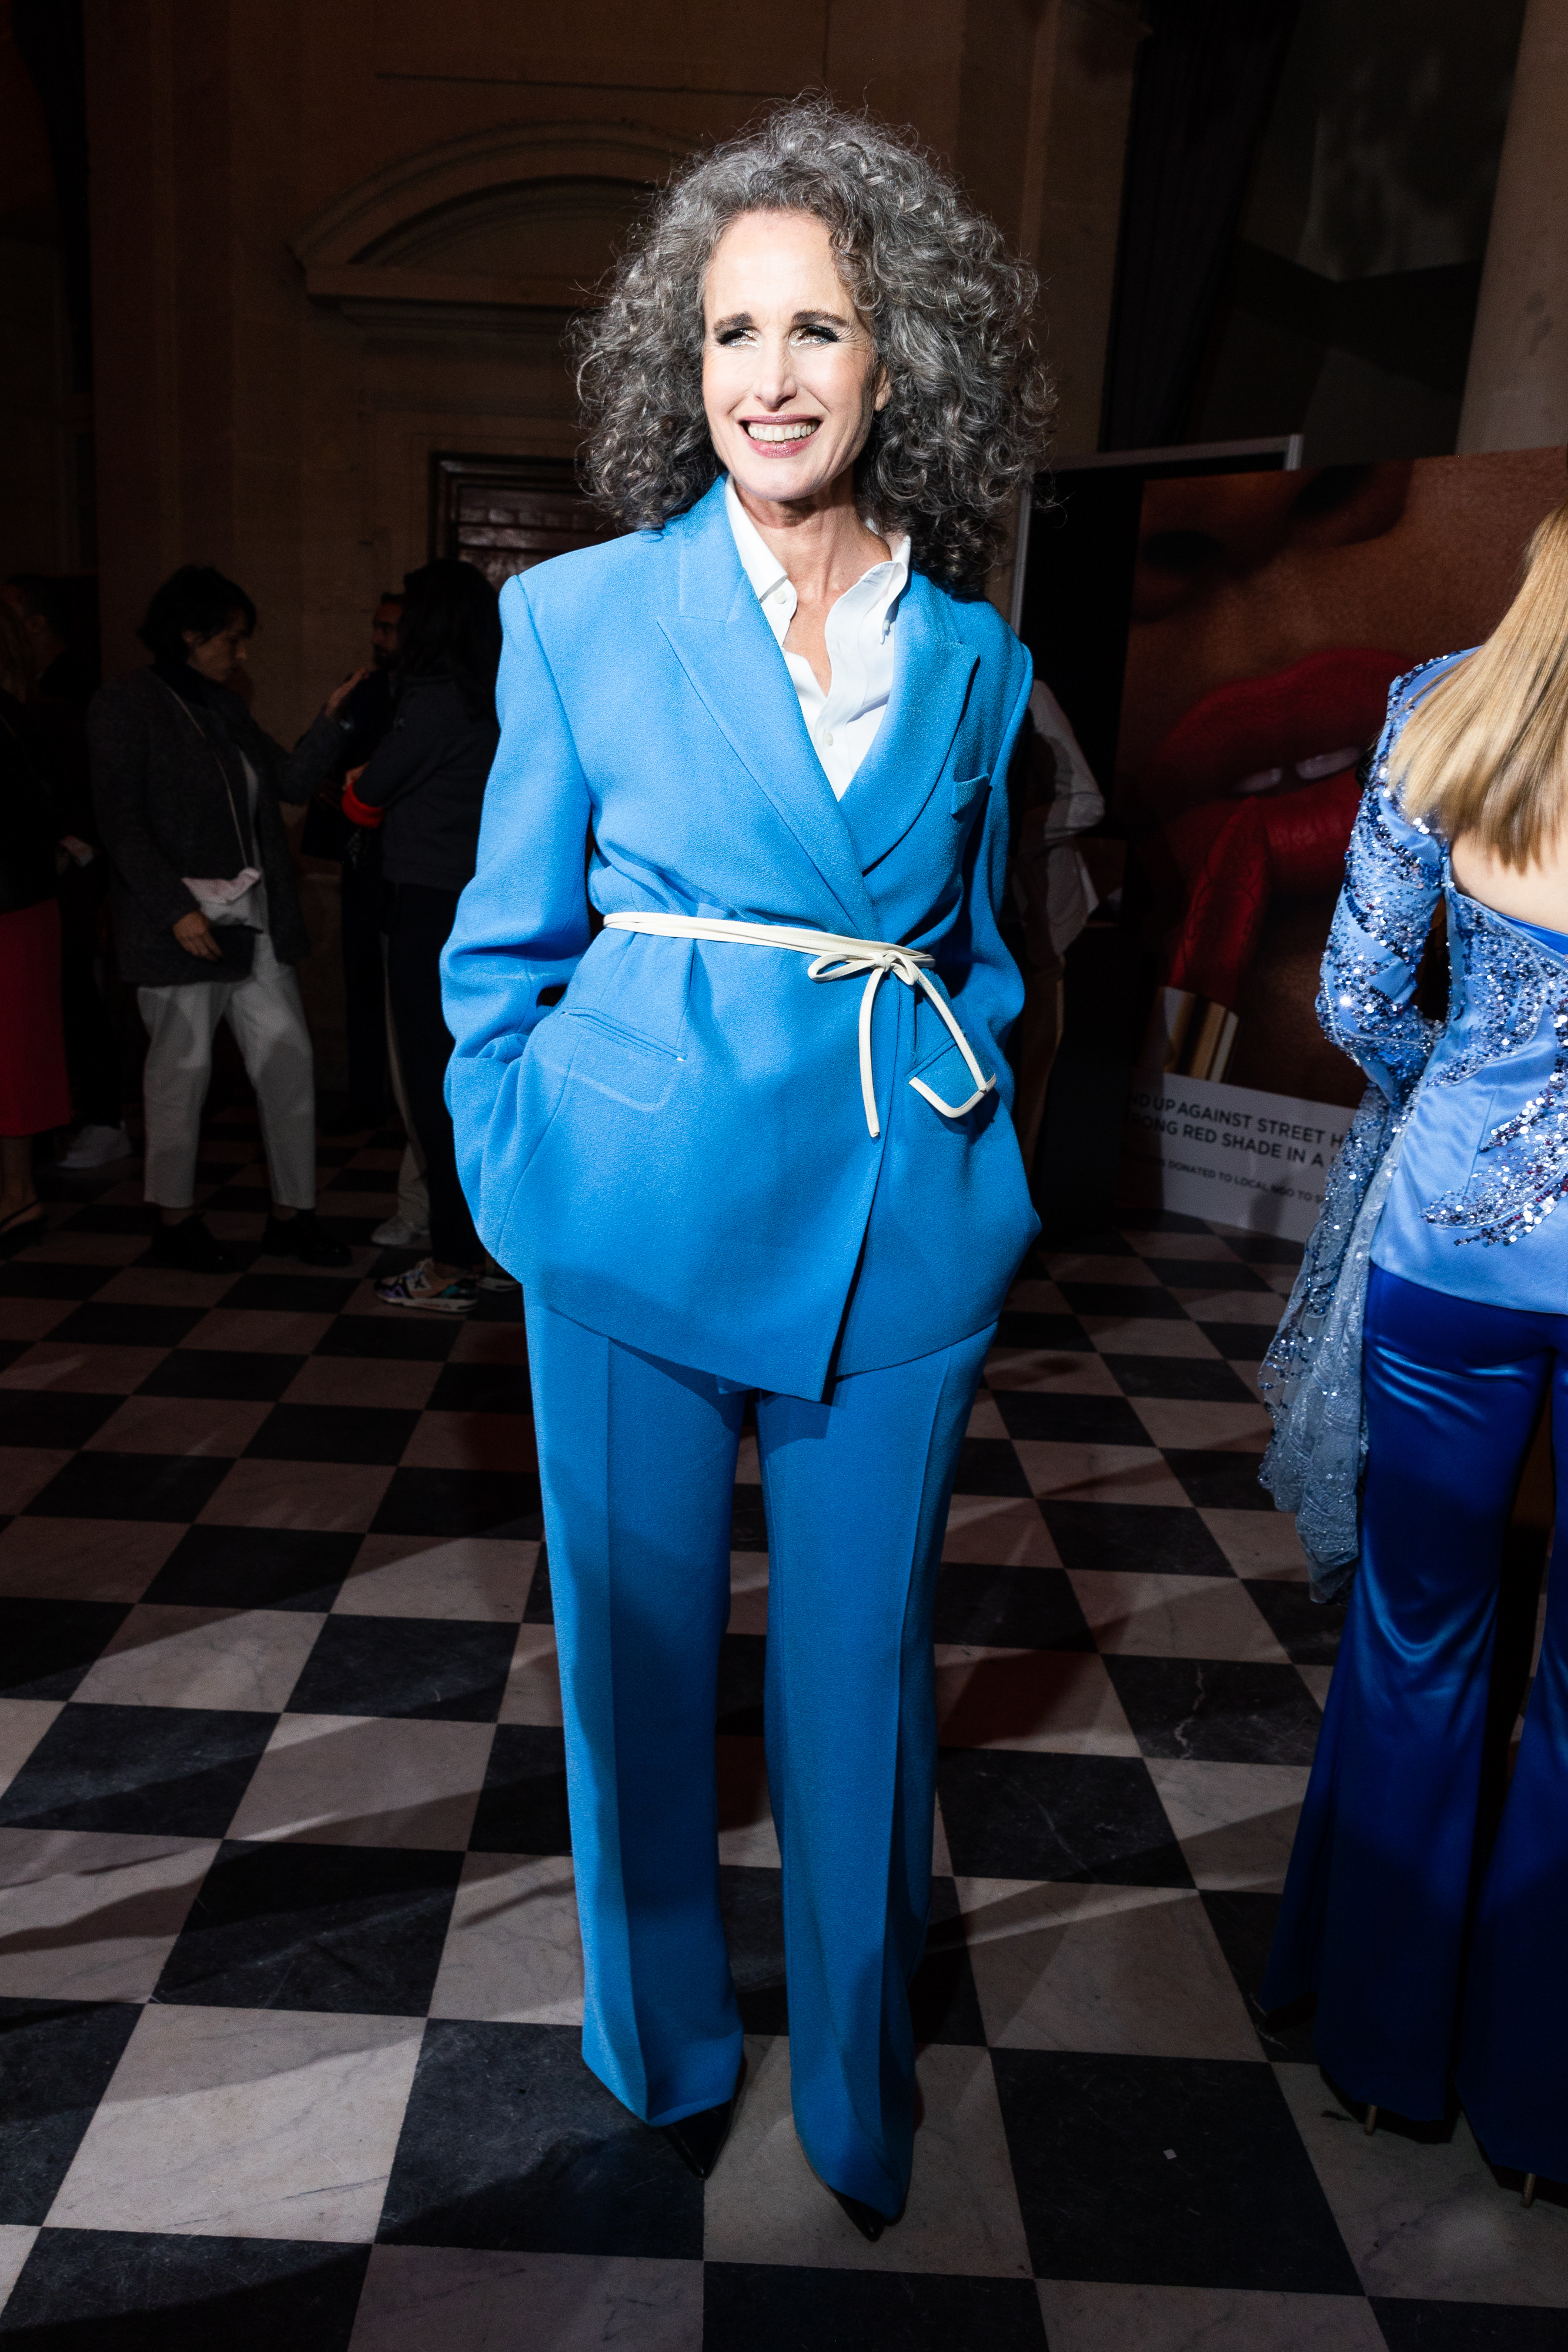 Andie MacDowell attends the after-show of "Le Défilé Walk Your Worth" show as part of Paris Fashion Week on October 2, 2022, in Paris, France | Source: Getty Images